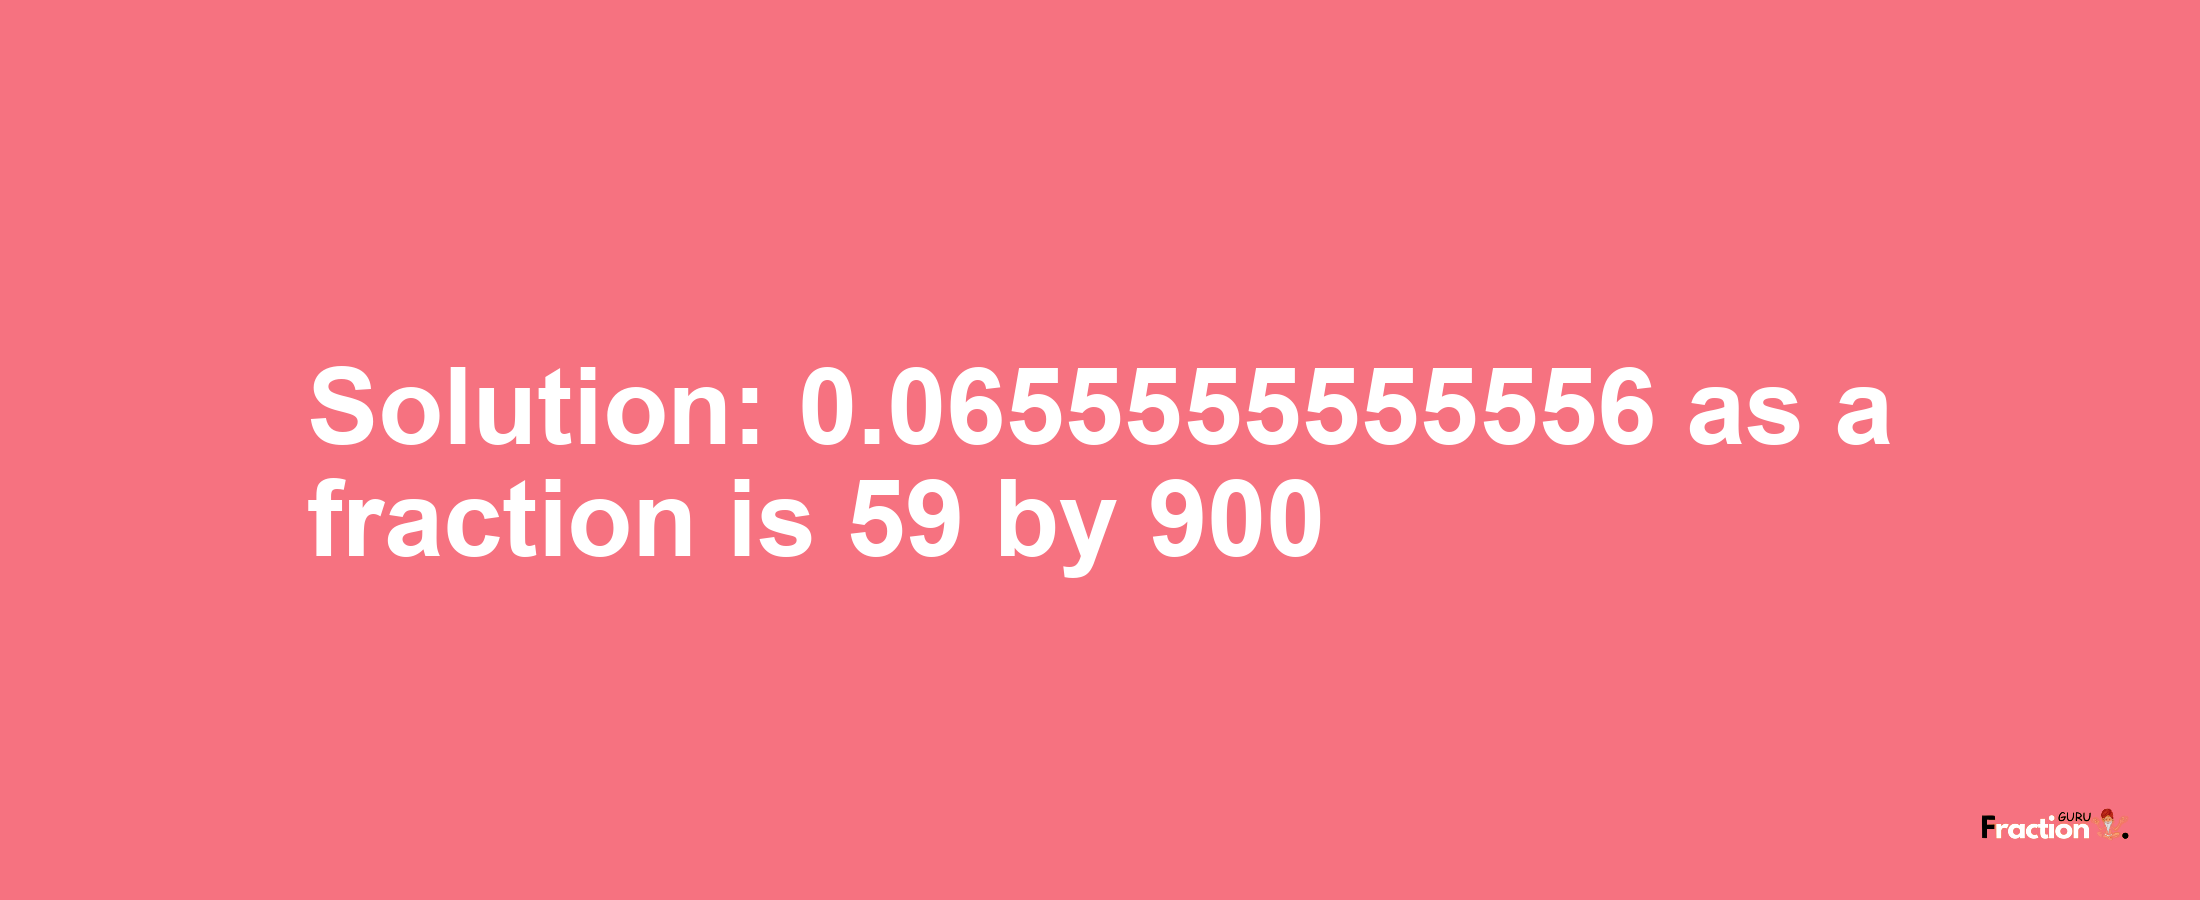 Solution:0.0655555555556 as a fraction is 59/900